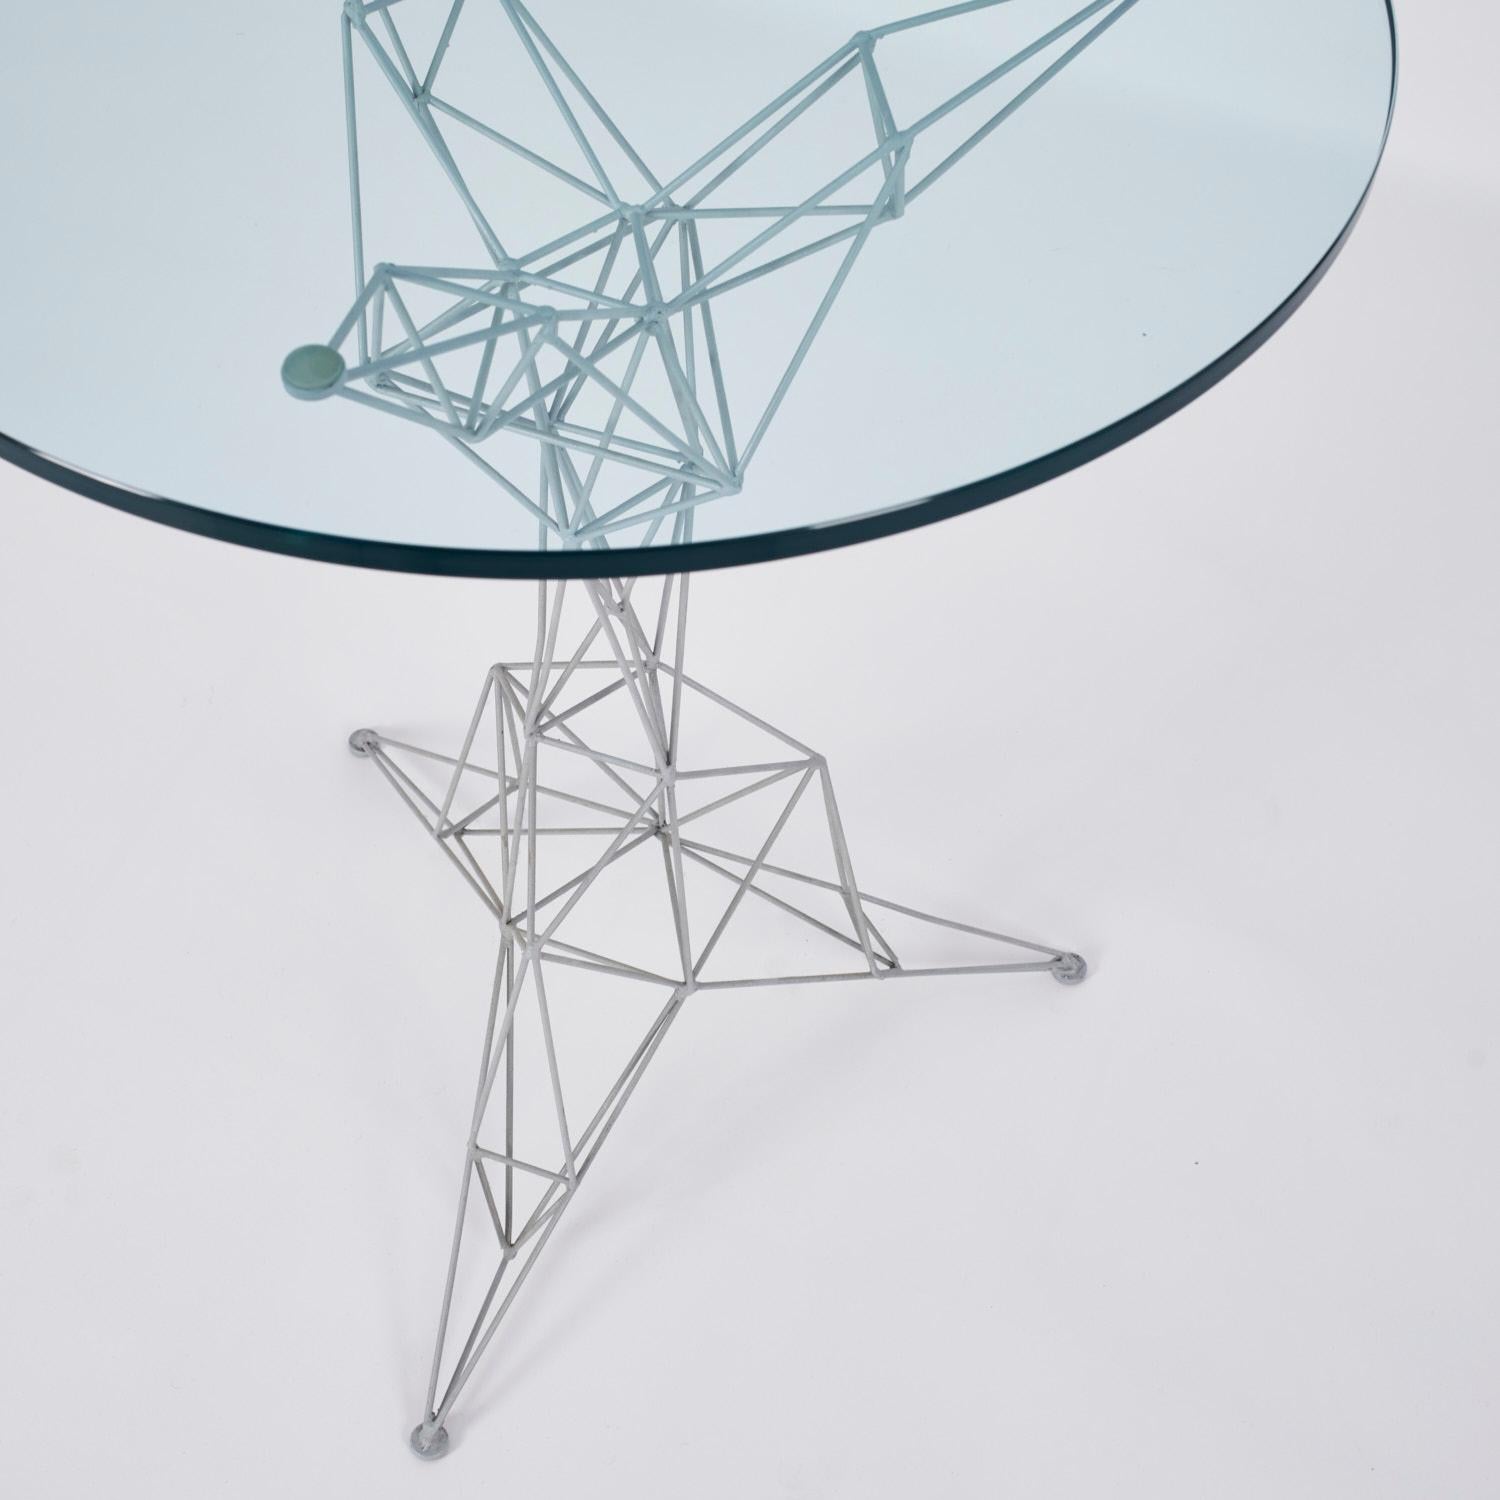 The Pylon series were intended to be light and architectural at the same time, if the chairs are pretty rare in their original Cappellini version, we can consider the table almost unique, and matches perfectly in its set. Most likely a gueridon, it